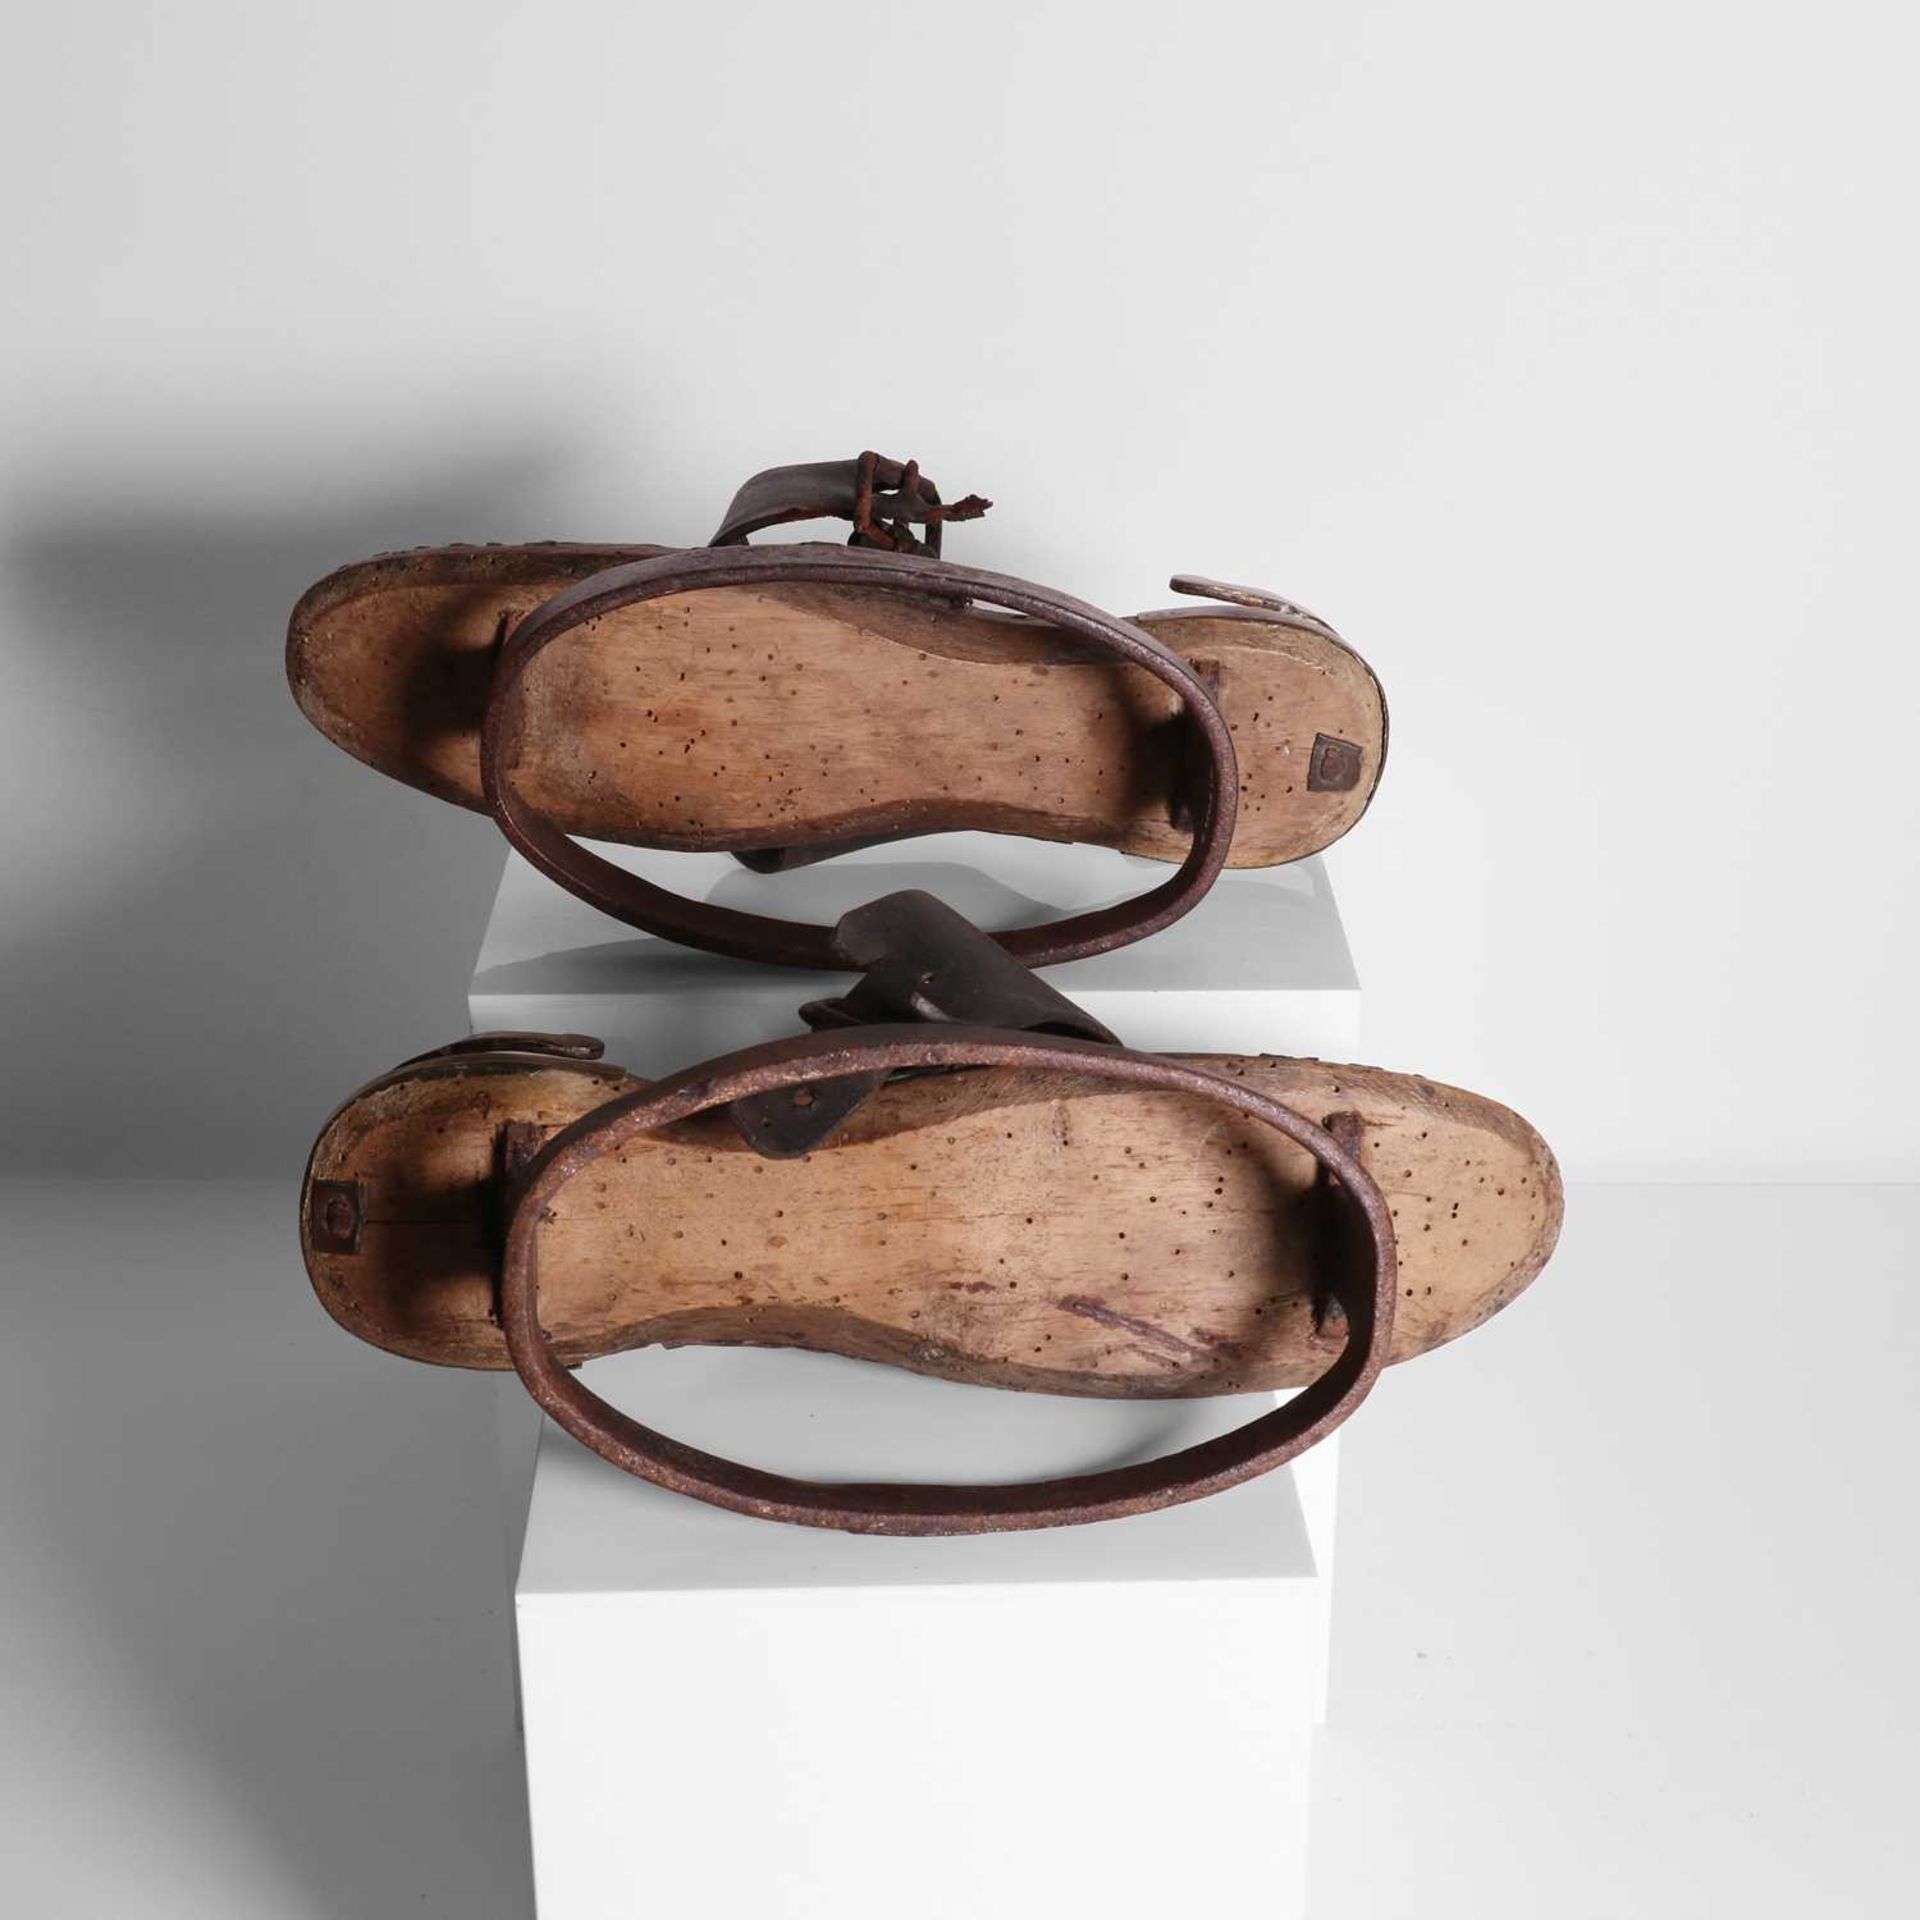 A pair of pattens or mud shoes, - Image 5 of 8